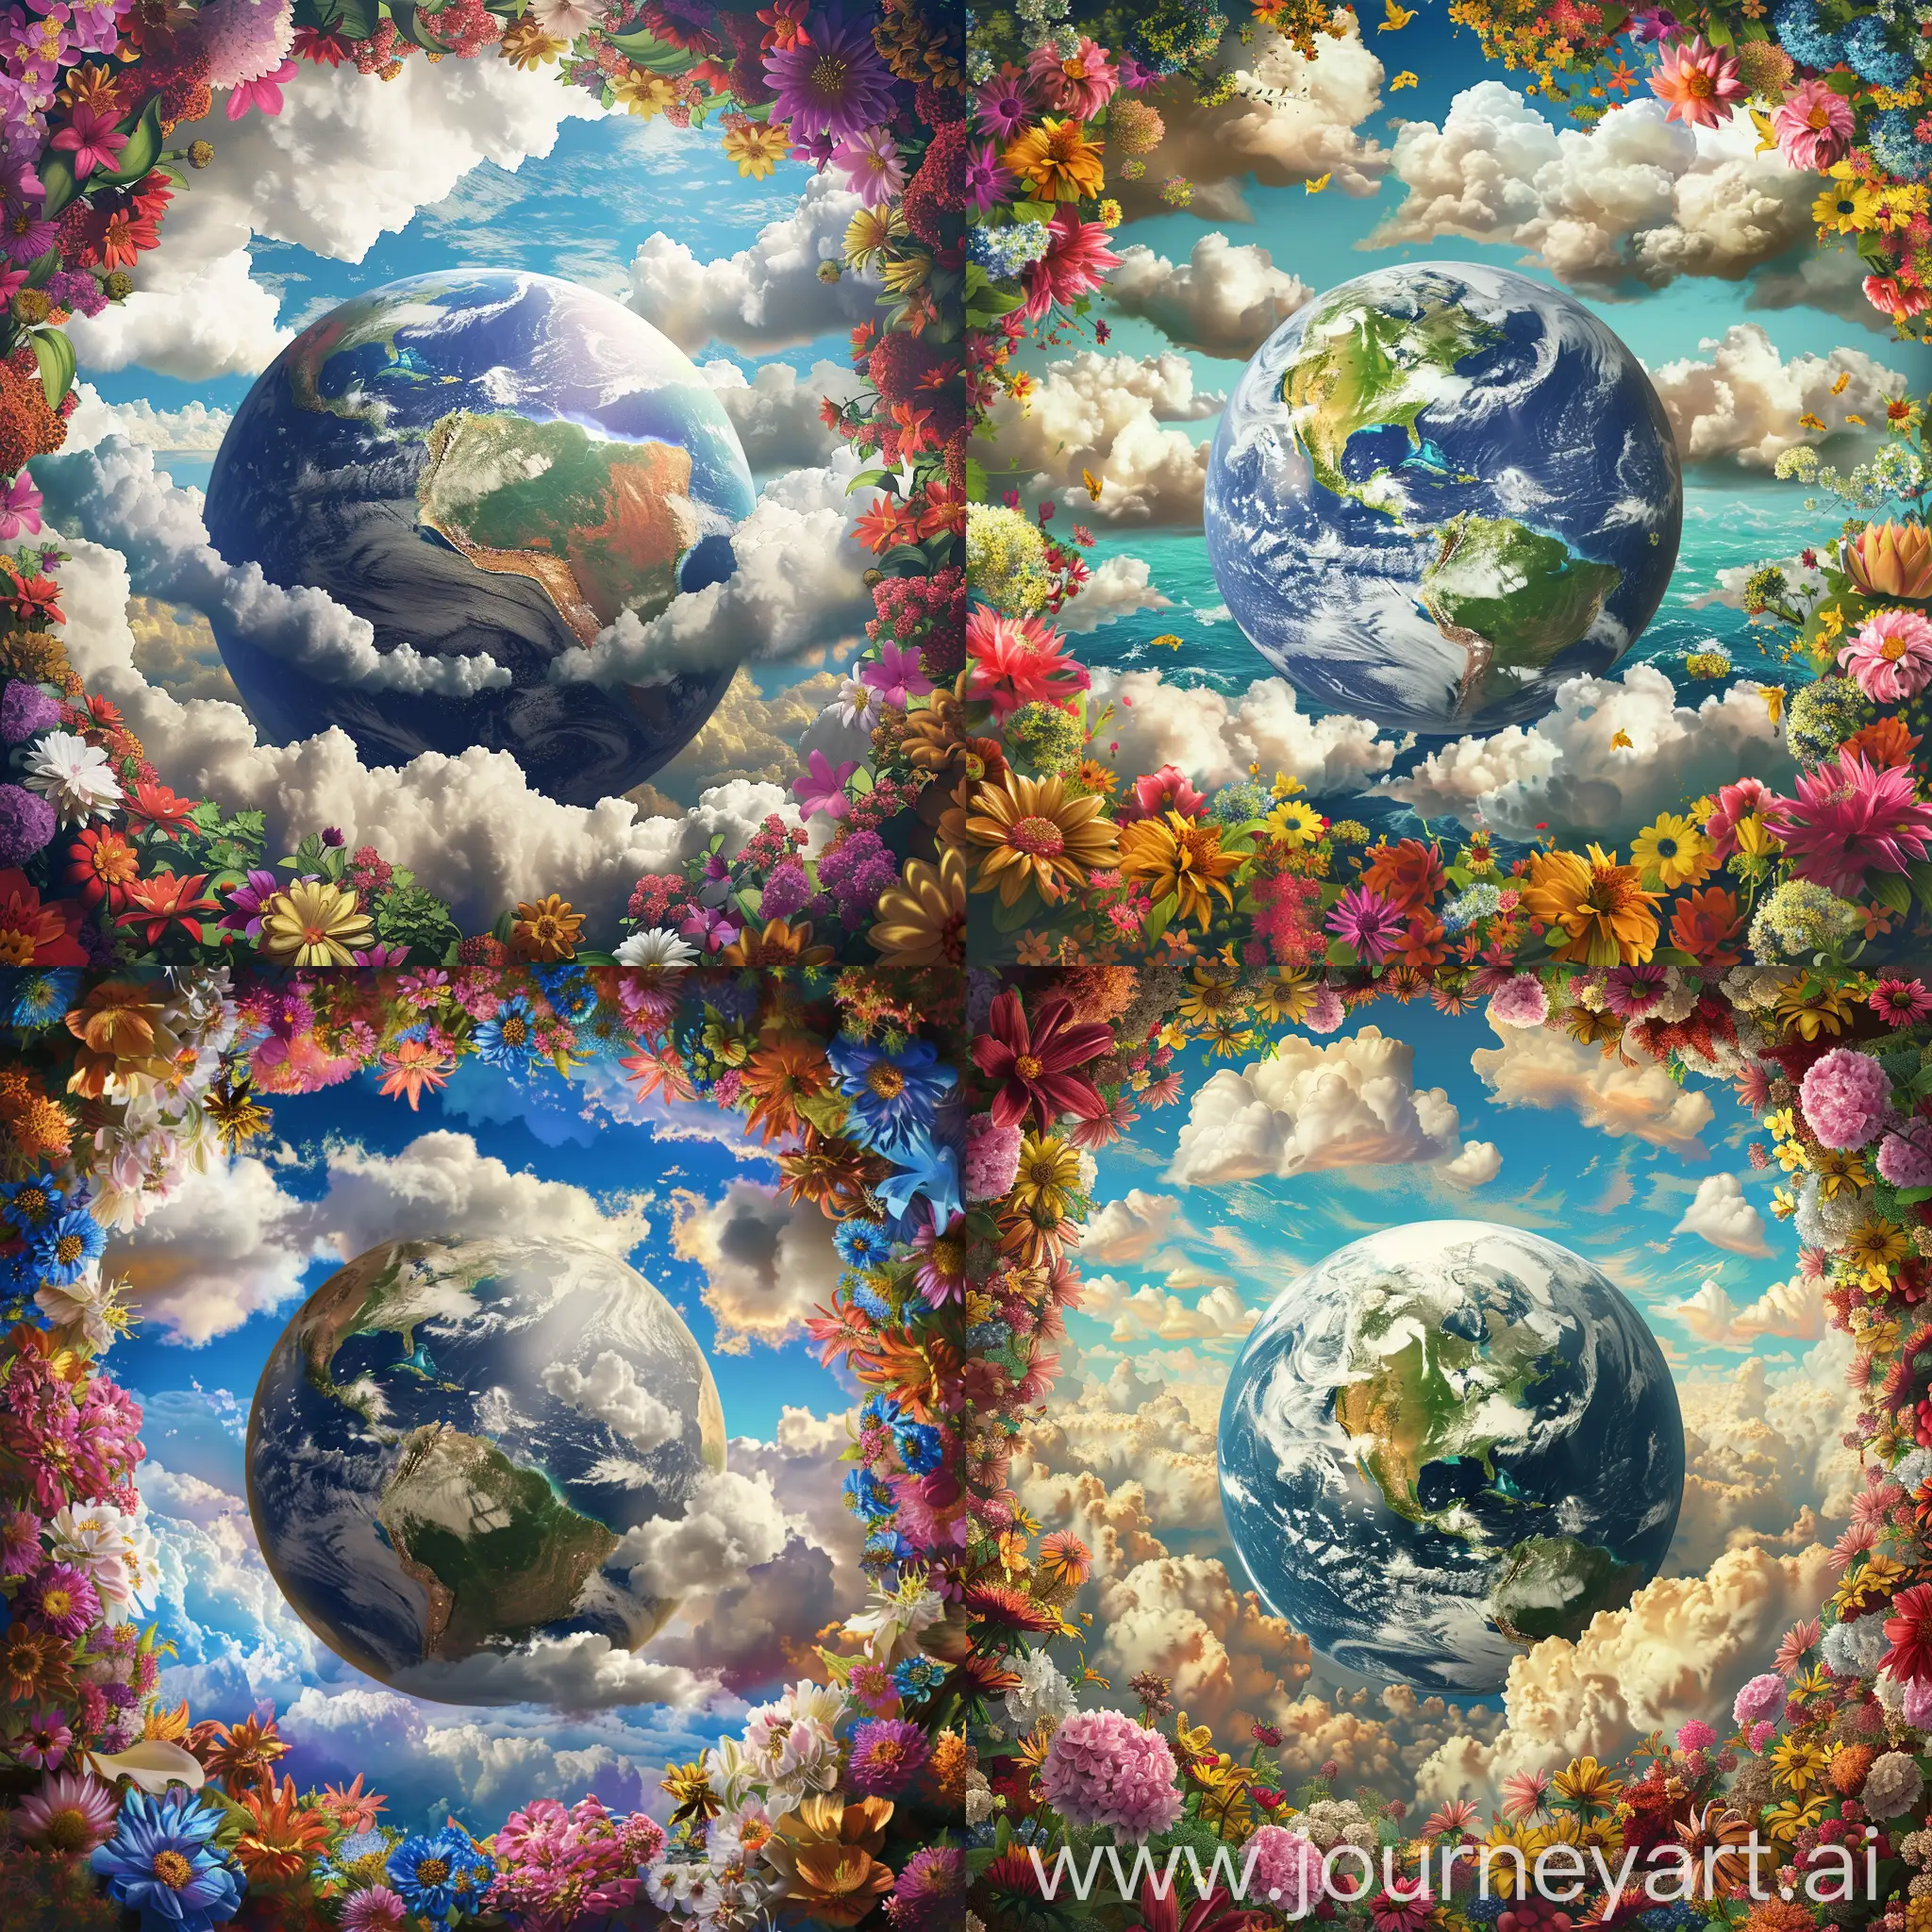 The image I have in mind for the NFT is of planet Earth surrounded by beautiful flowers, seas, dry lands, and deserts, all with a special and captivating appeal. The unique and beautiful flowers around the Earth, as well as the attractive clouds above it, bring a special beauty to the image.

The image type is digital paintings



The color pattern I have in mind for this design includes the following:


Flower Pattern:
#FFD700
#FFA500
#FF6347
#FF69B4
#8A2BE2
Cloud Pattern:
#F0FFFF
#87CEFA
#ADD8E6
#B0E0E6
#CAE1FF
Sea Pattern:
#4682B4
#5F9EA0
#20B2AA
#48D1CC
#7FFFD4
Earth Pattern:
#8B4513
#A0522D
#CD853F
#D2691E
#F4A460